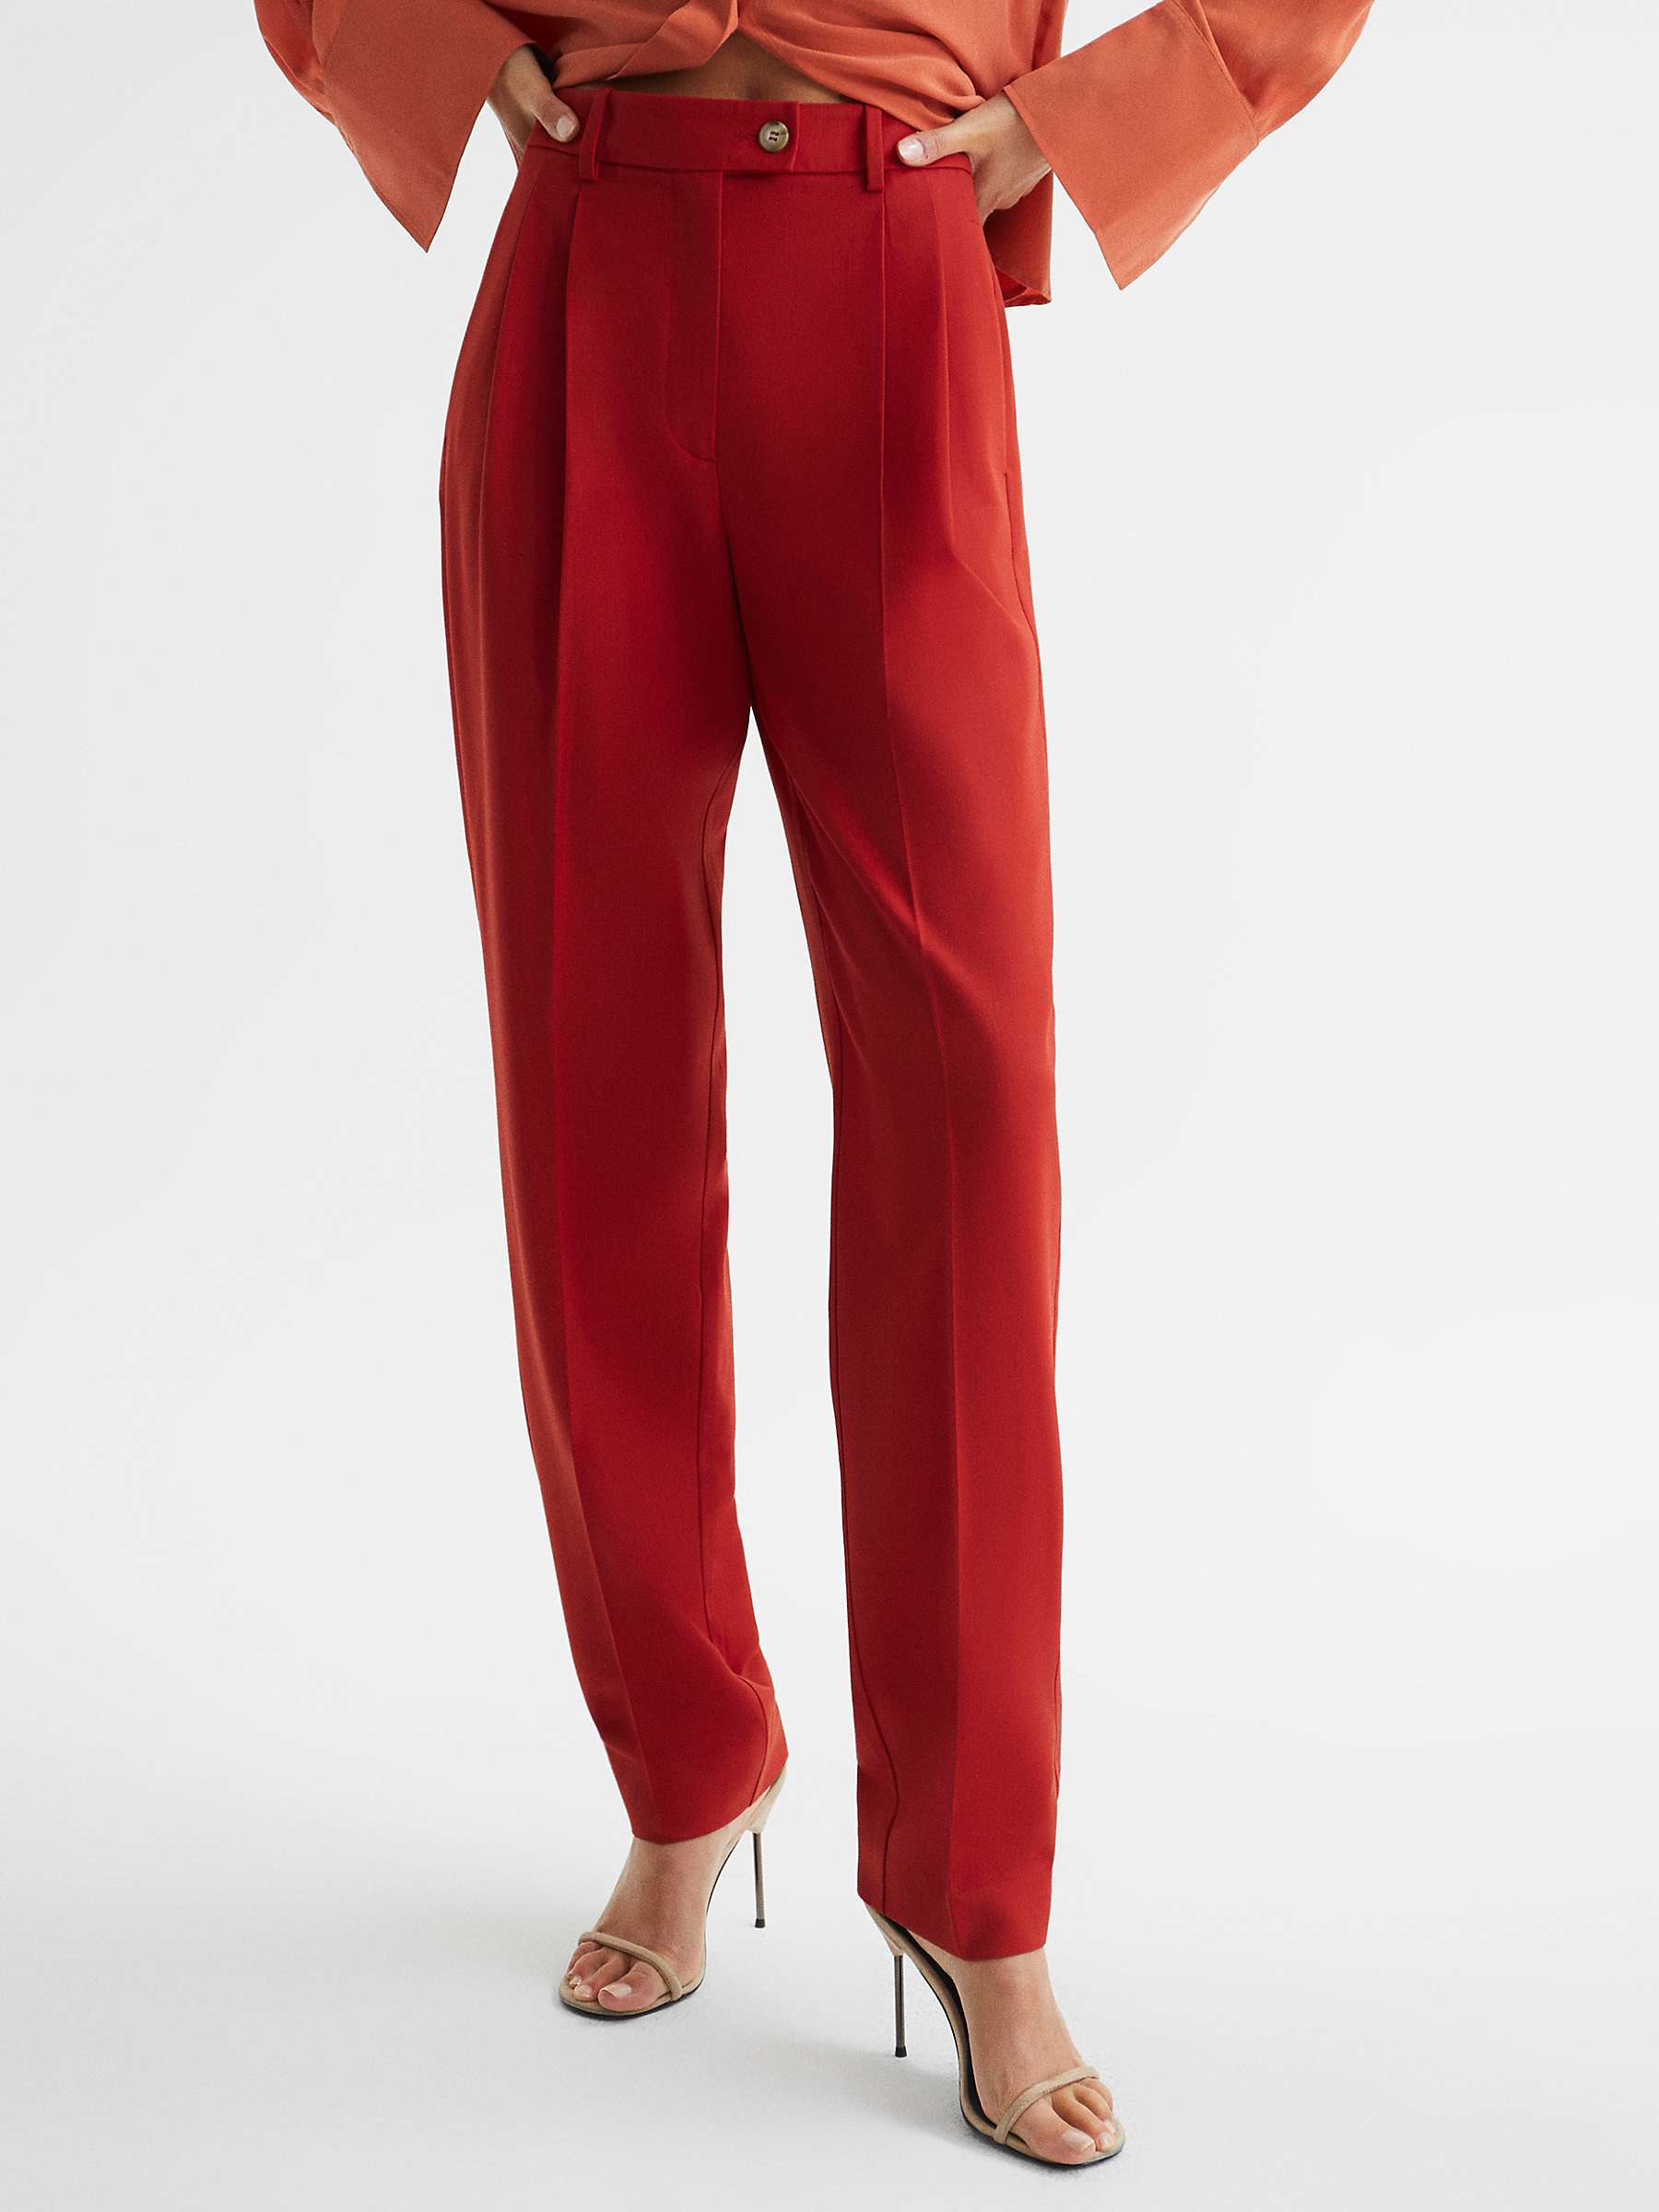 Reiss Kamila Wool Blend Tailored Trousers, Red at John Lewis & Partners